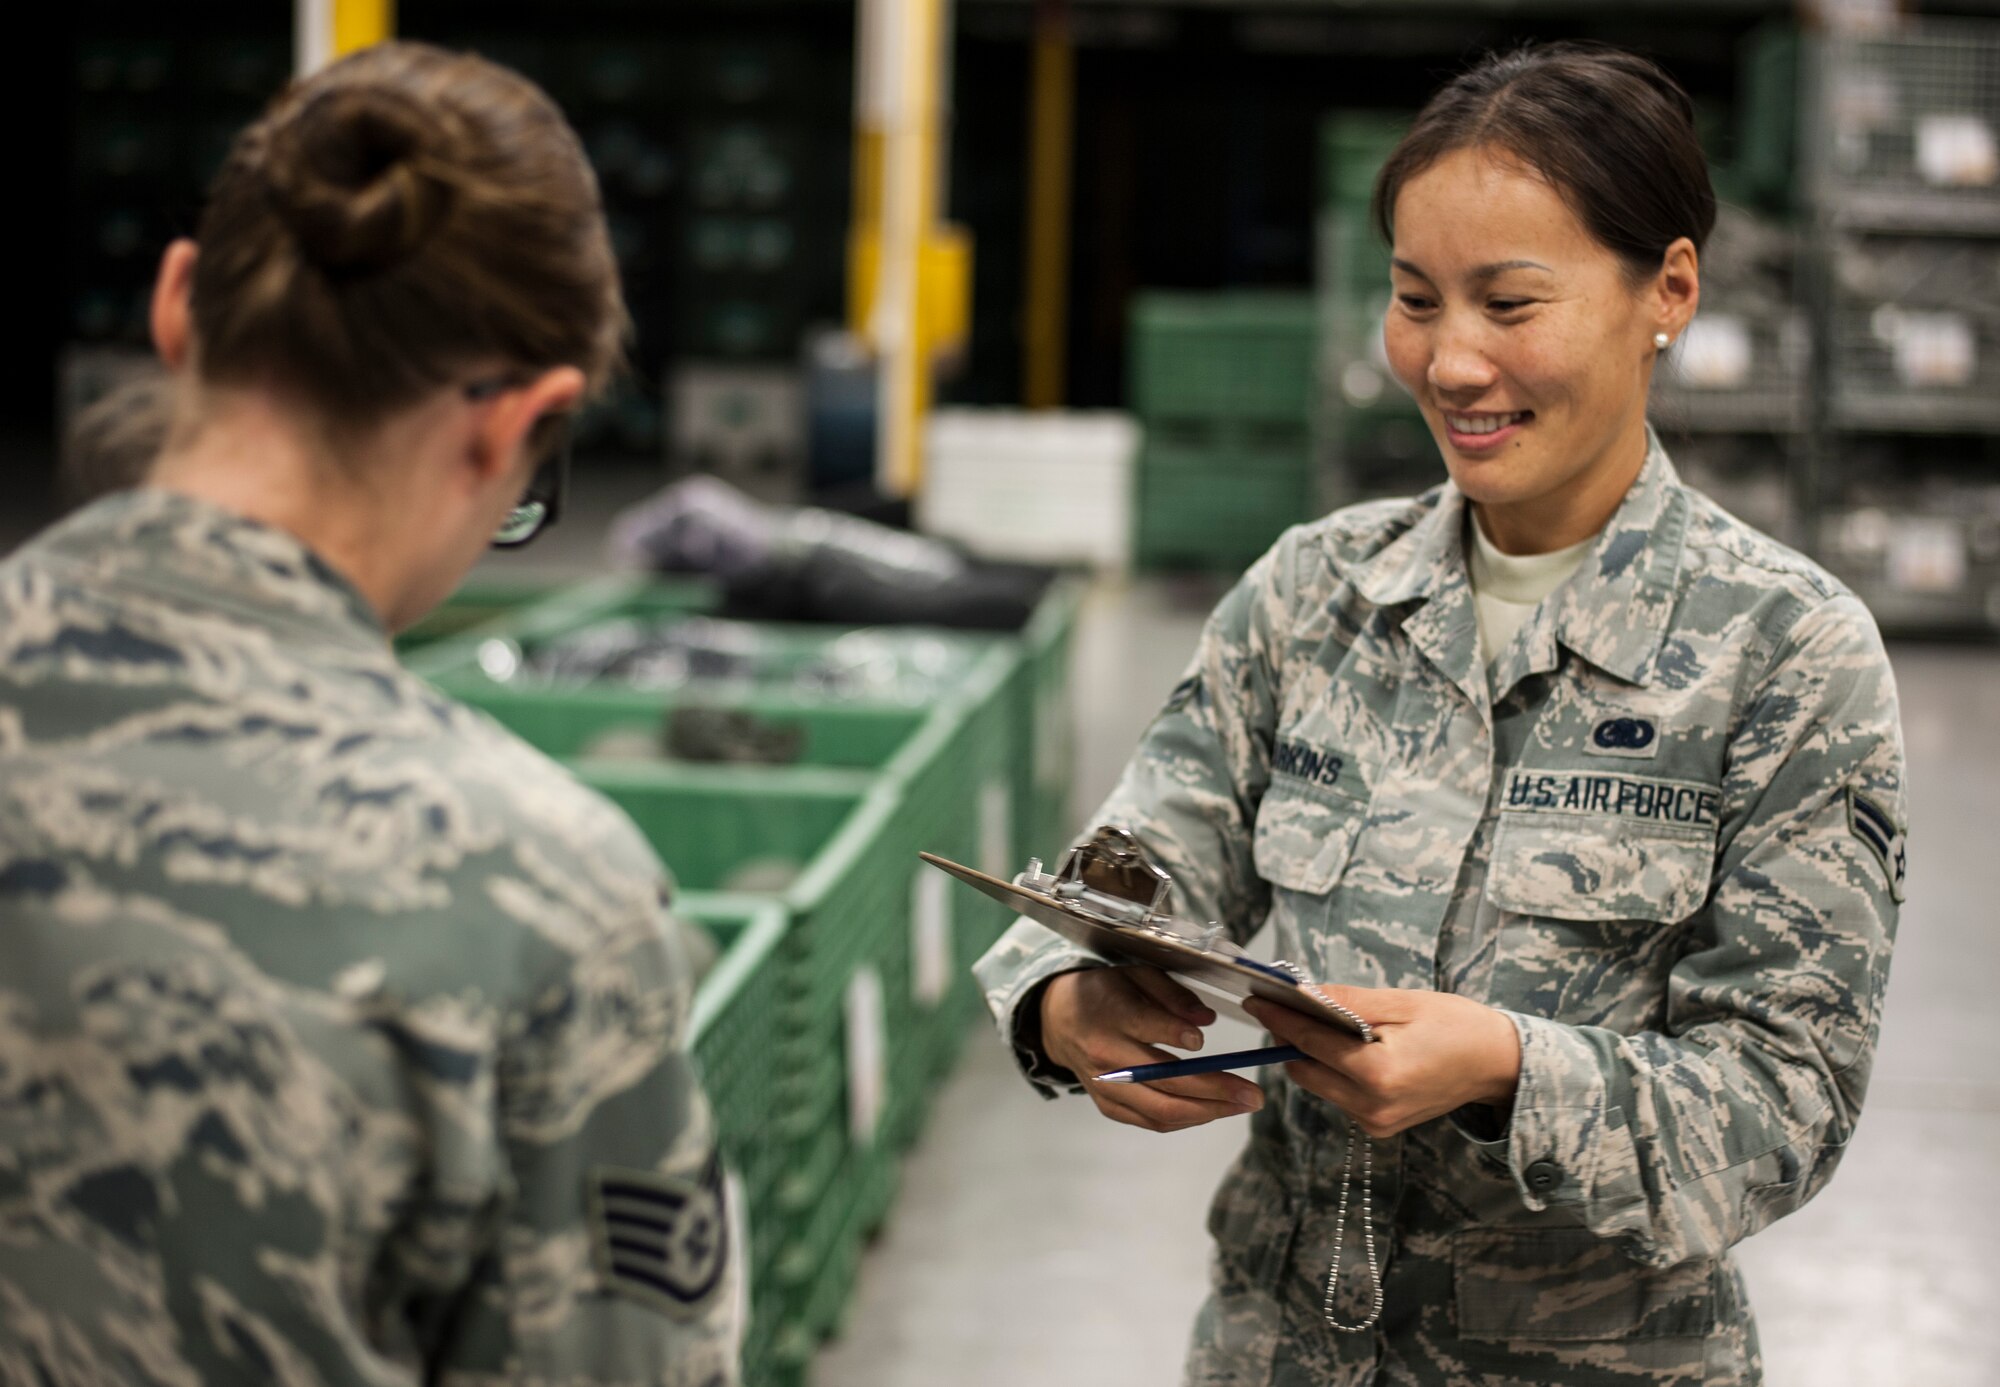 U.S. Air Force Airman 1st Class Gantuya Larkins, right, an individual protective equipment (IPE) technician assigned to the 6th Logistics Readiness Squadron, assists a customer make a deployment bag at MacDill Air Force Base, Fla., Dec. 28, 2017.